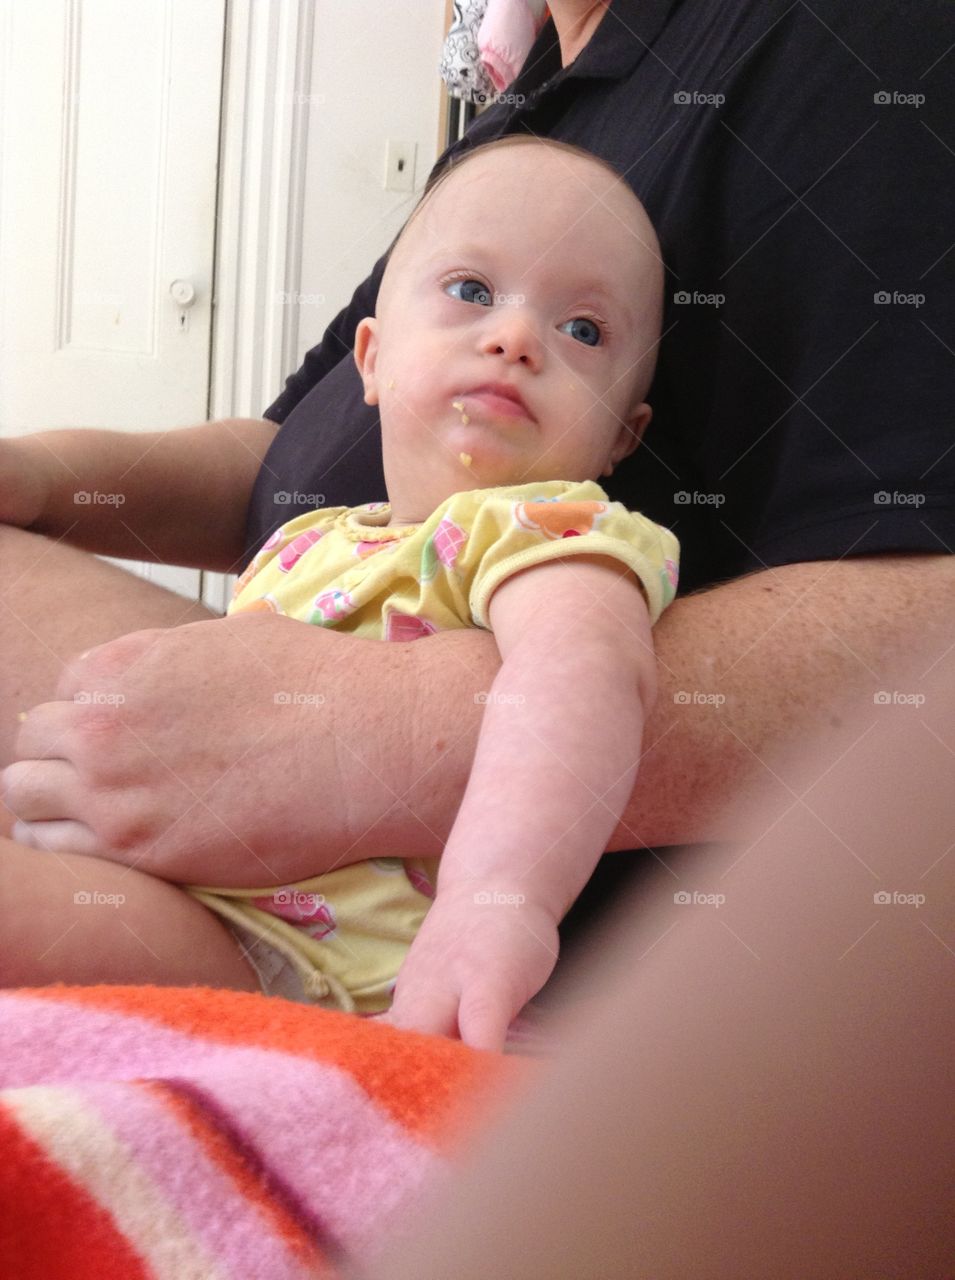 Baby with Down syndrome